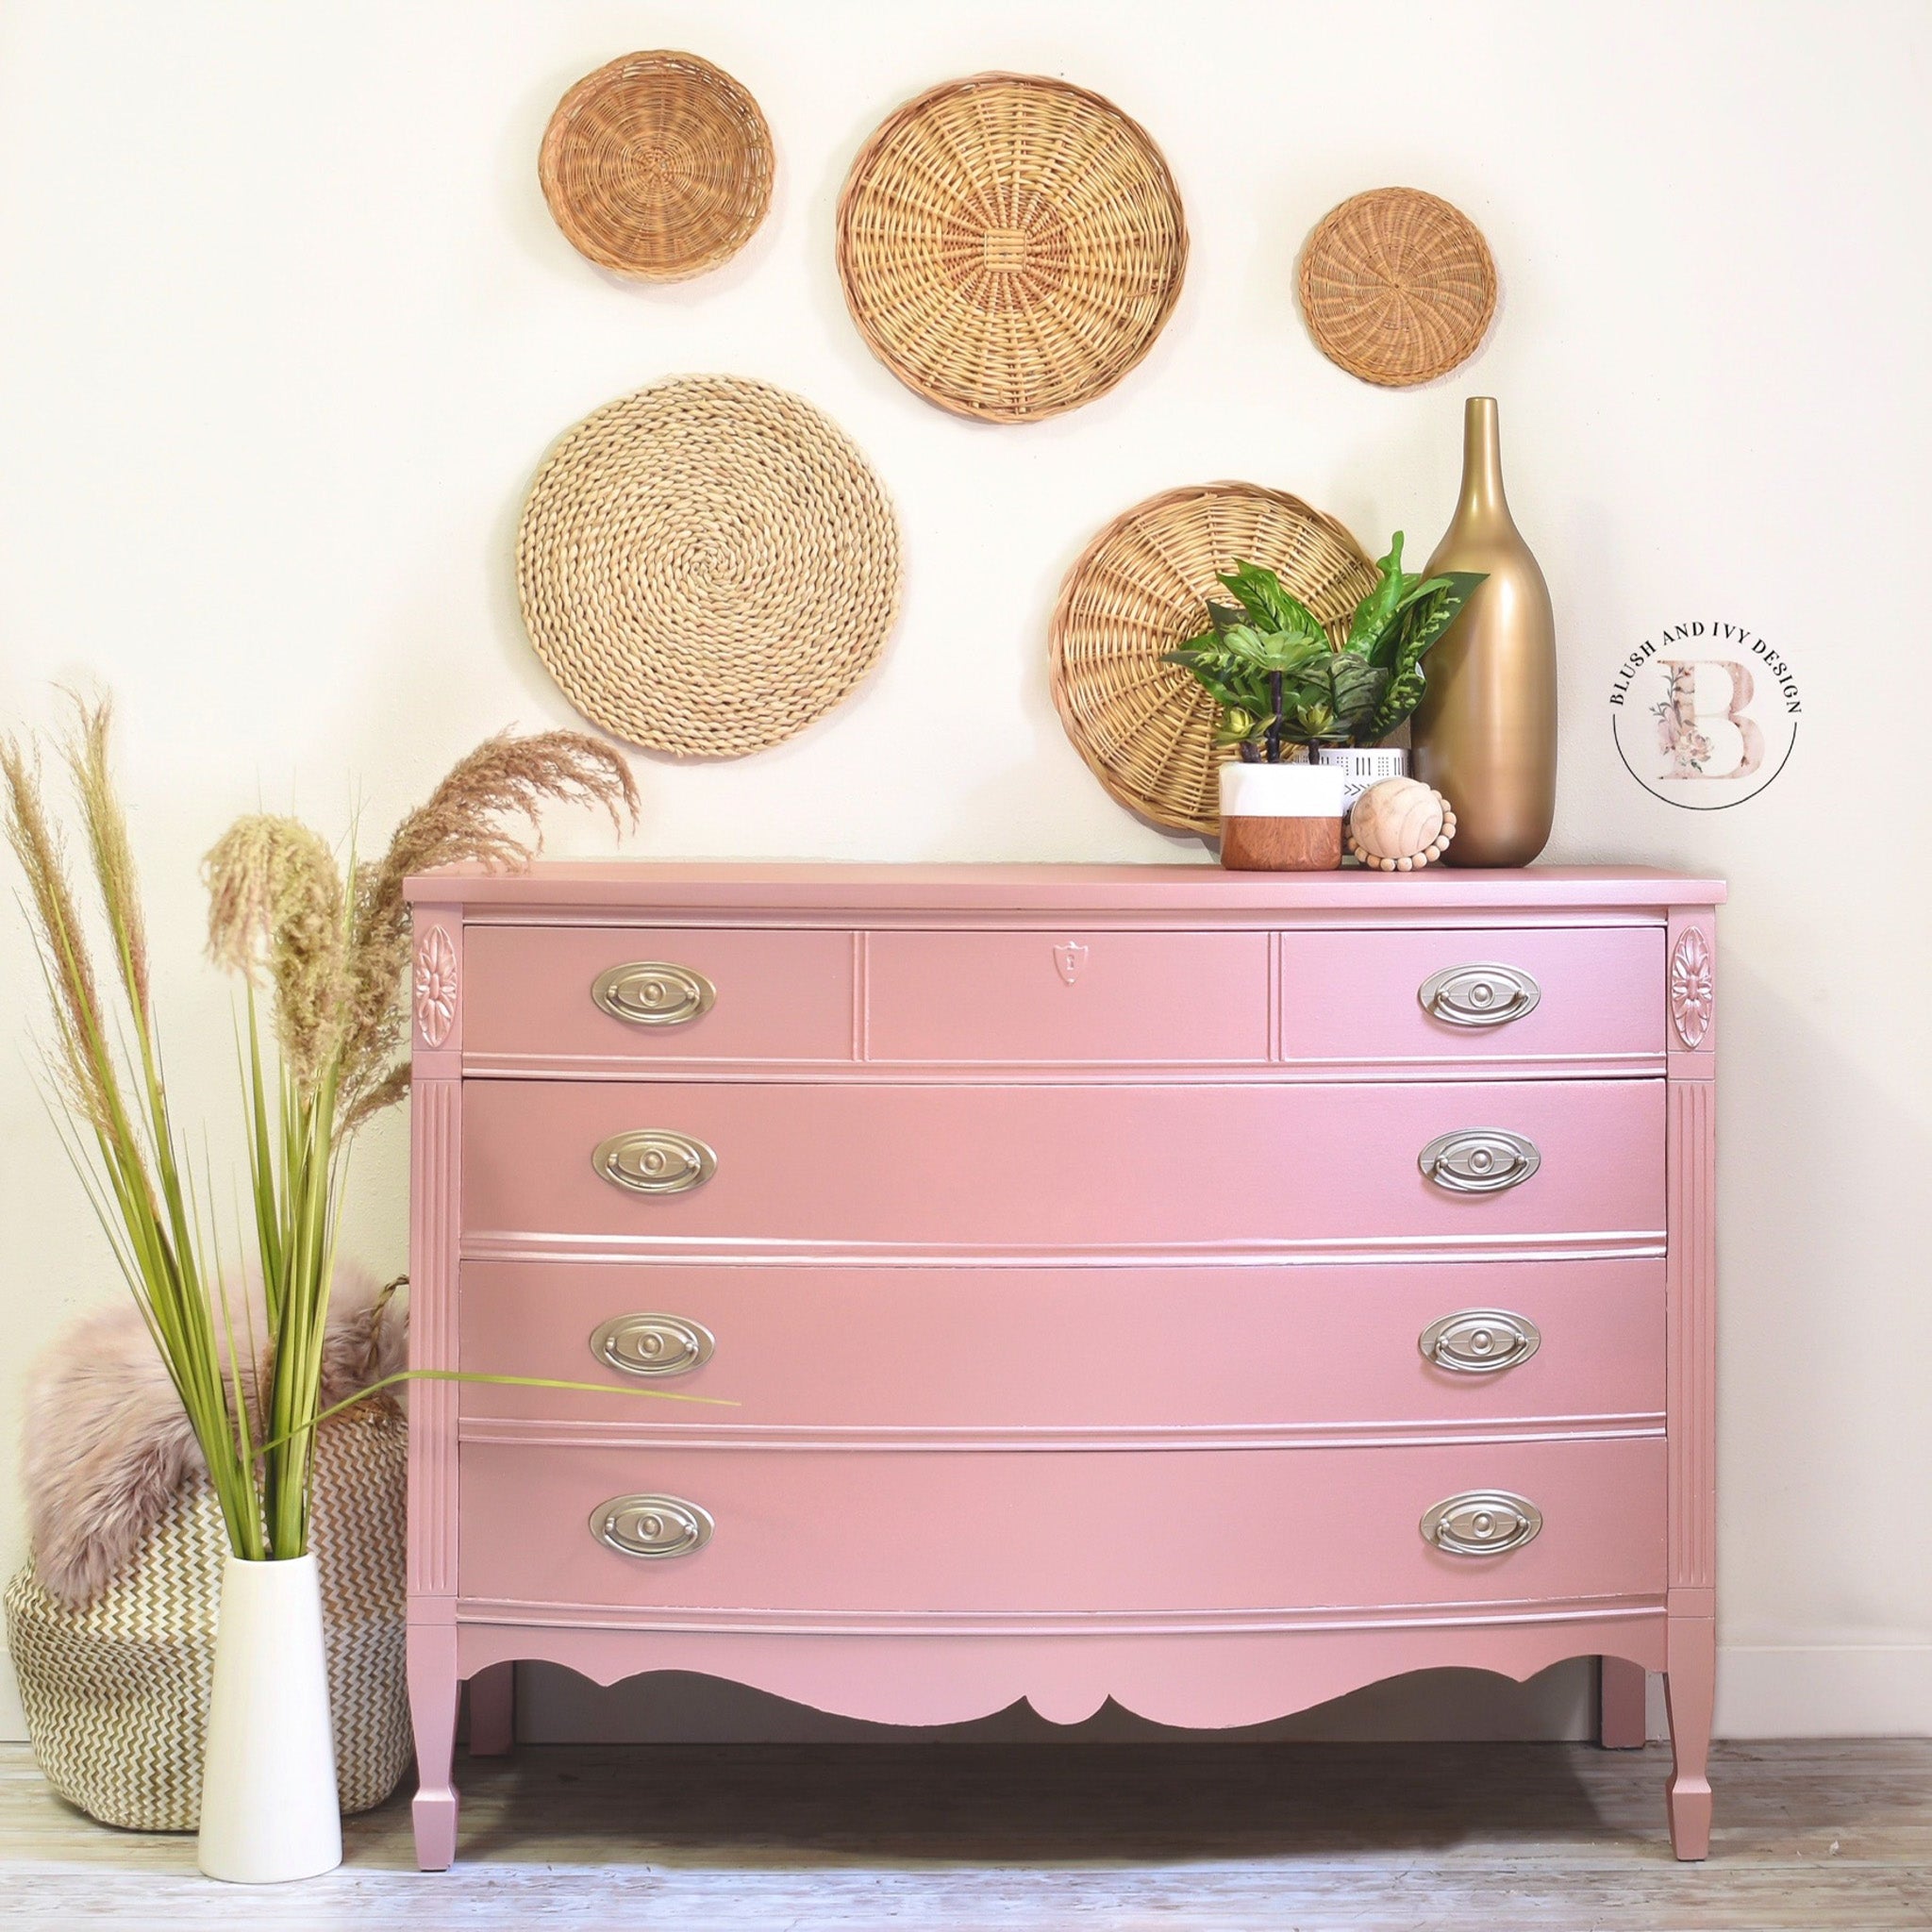 A vintage 4-drawer dresser refurbished by Blush and Ivy Design is painted in Dixie Belle's Pink Champagne chalk mineral paint.